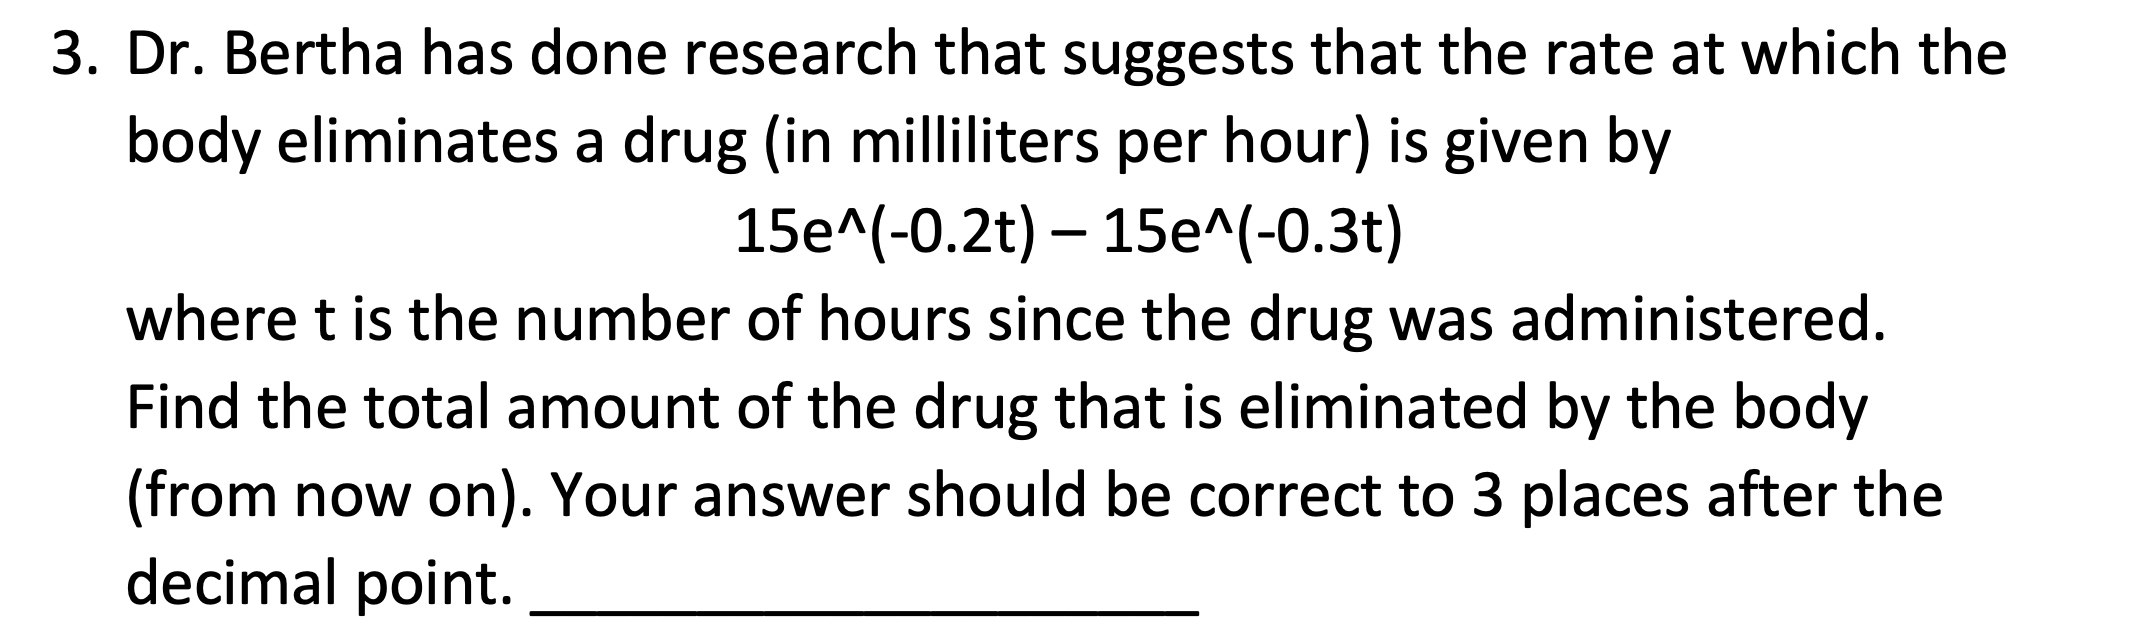 Dr. Bertha has done research that suggests that the rate at which the
body eliminates a drug (in milliliters per hour) is given by
15e^(-0.2t) – 15e^(-0.3t)
where t is the number of hours since the drug was administered.
Find the total amount of the drug that is eliminated by the body
(from now on). Your answer should be correct to 3 places after the
decimal point.
